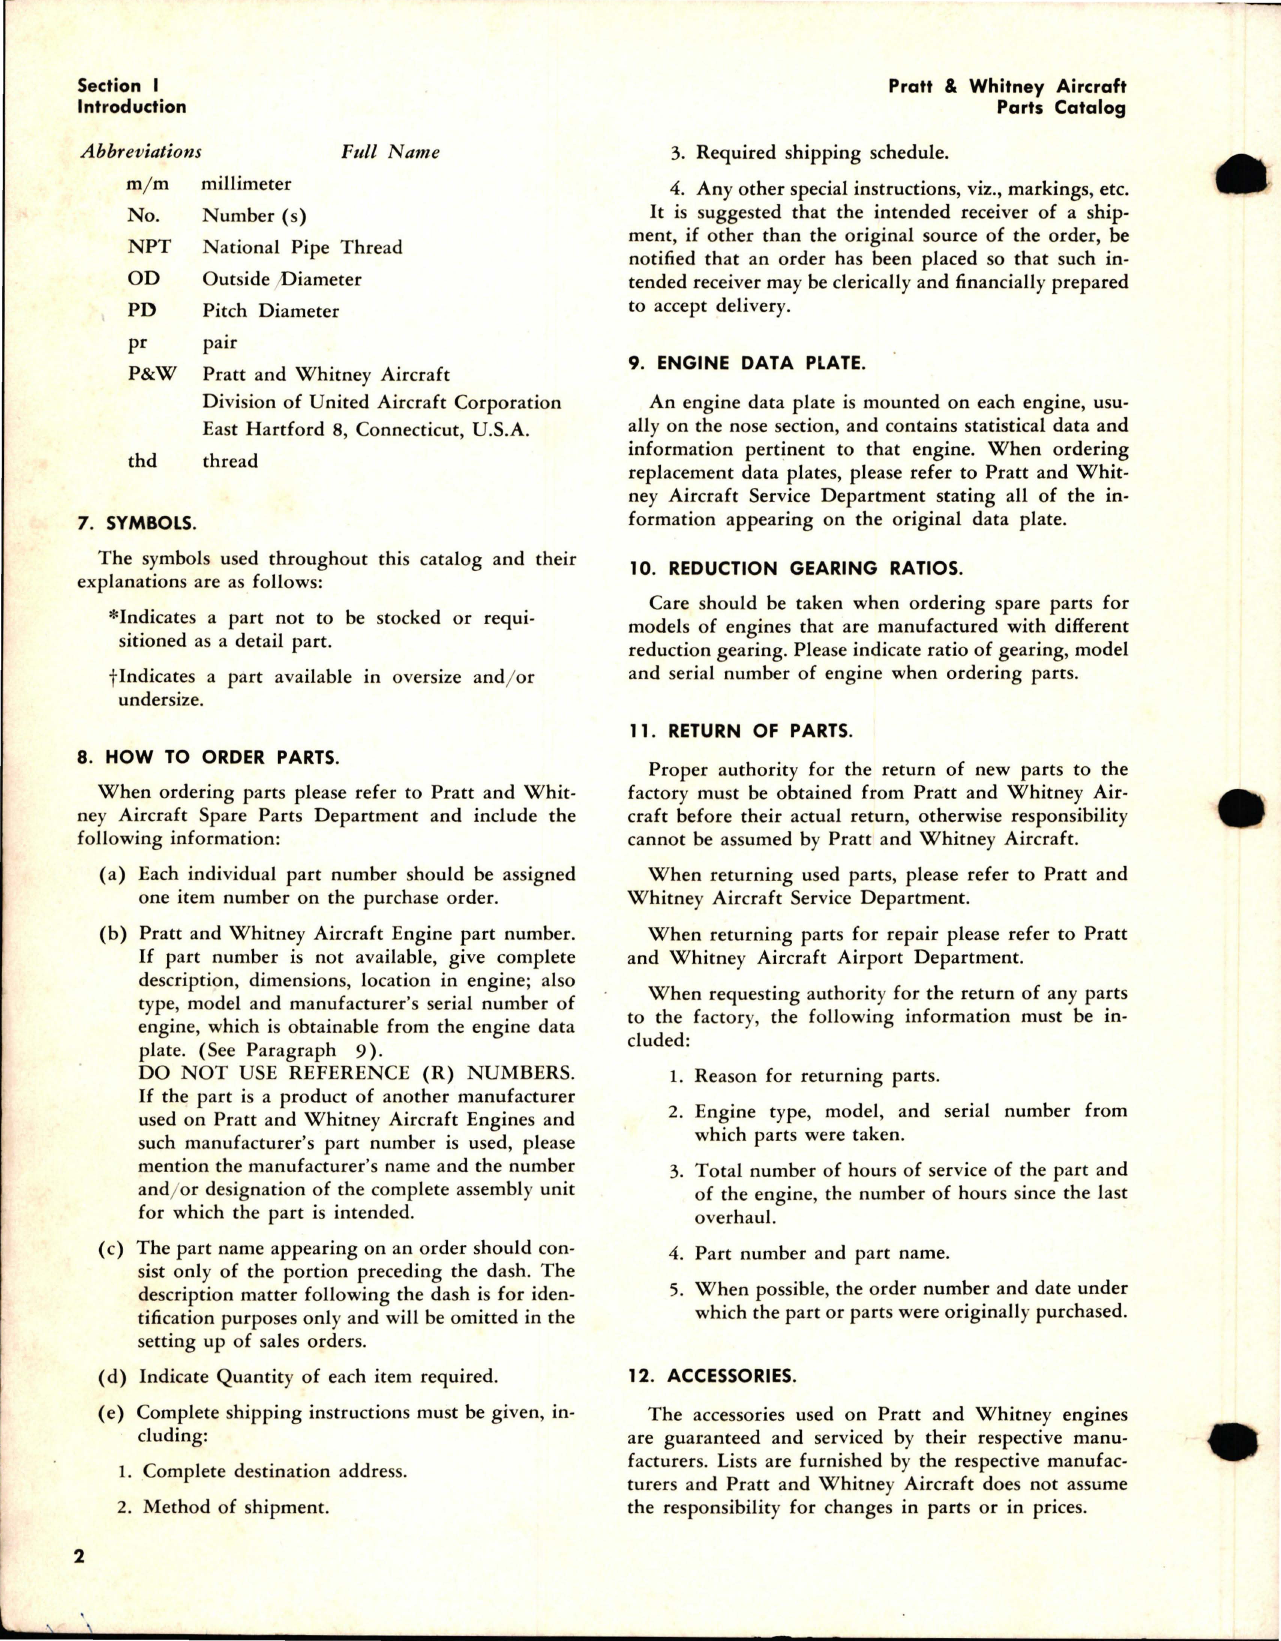 Sample page 5 from AirCorps Library document: Parts Catalog for Twin Wasp Model R-1830-C3G & -92 Pratt & Whitney Engines